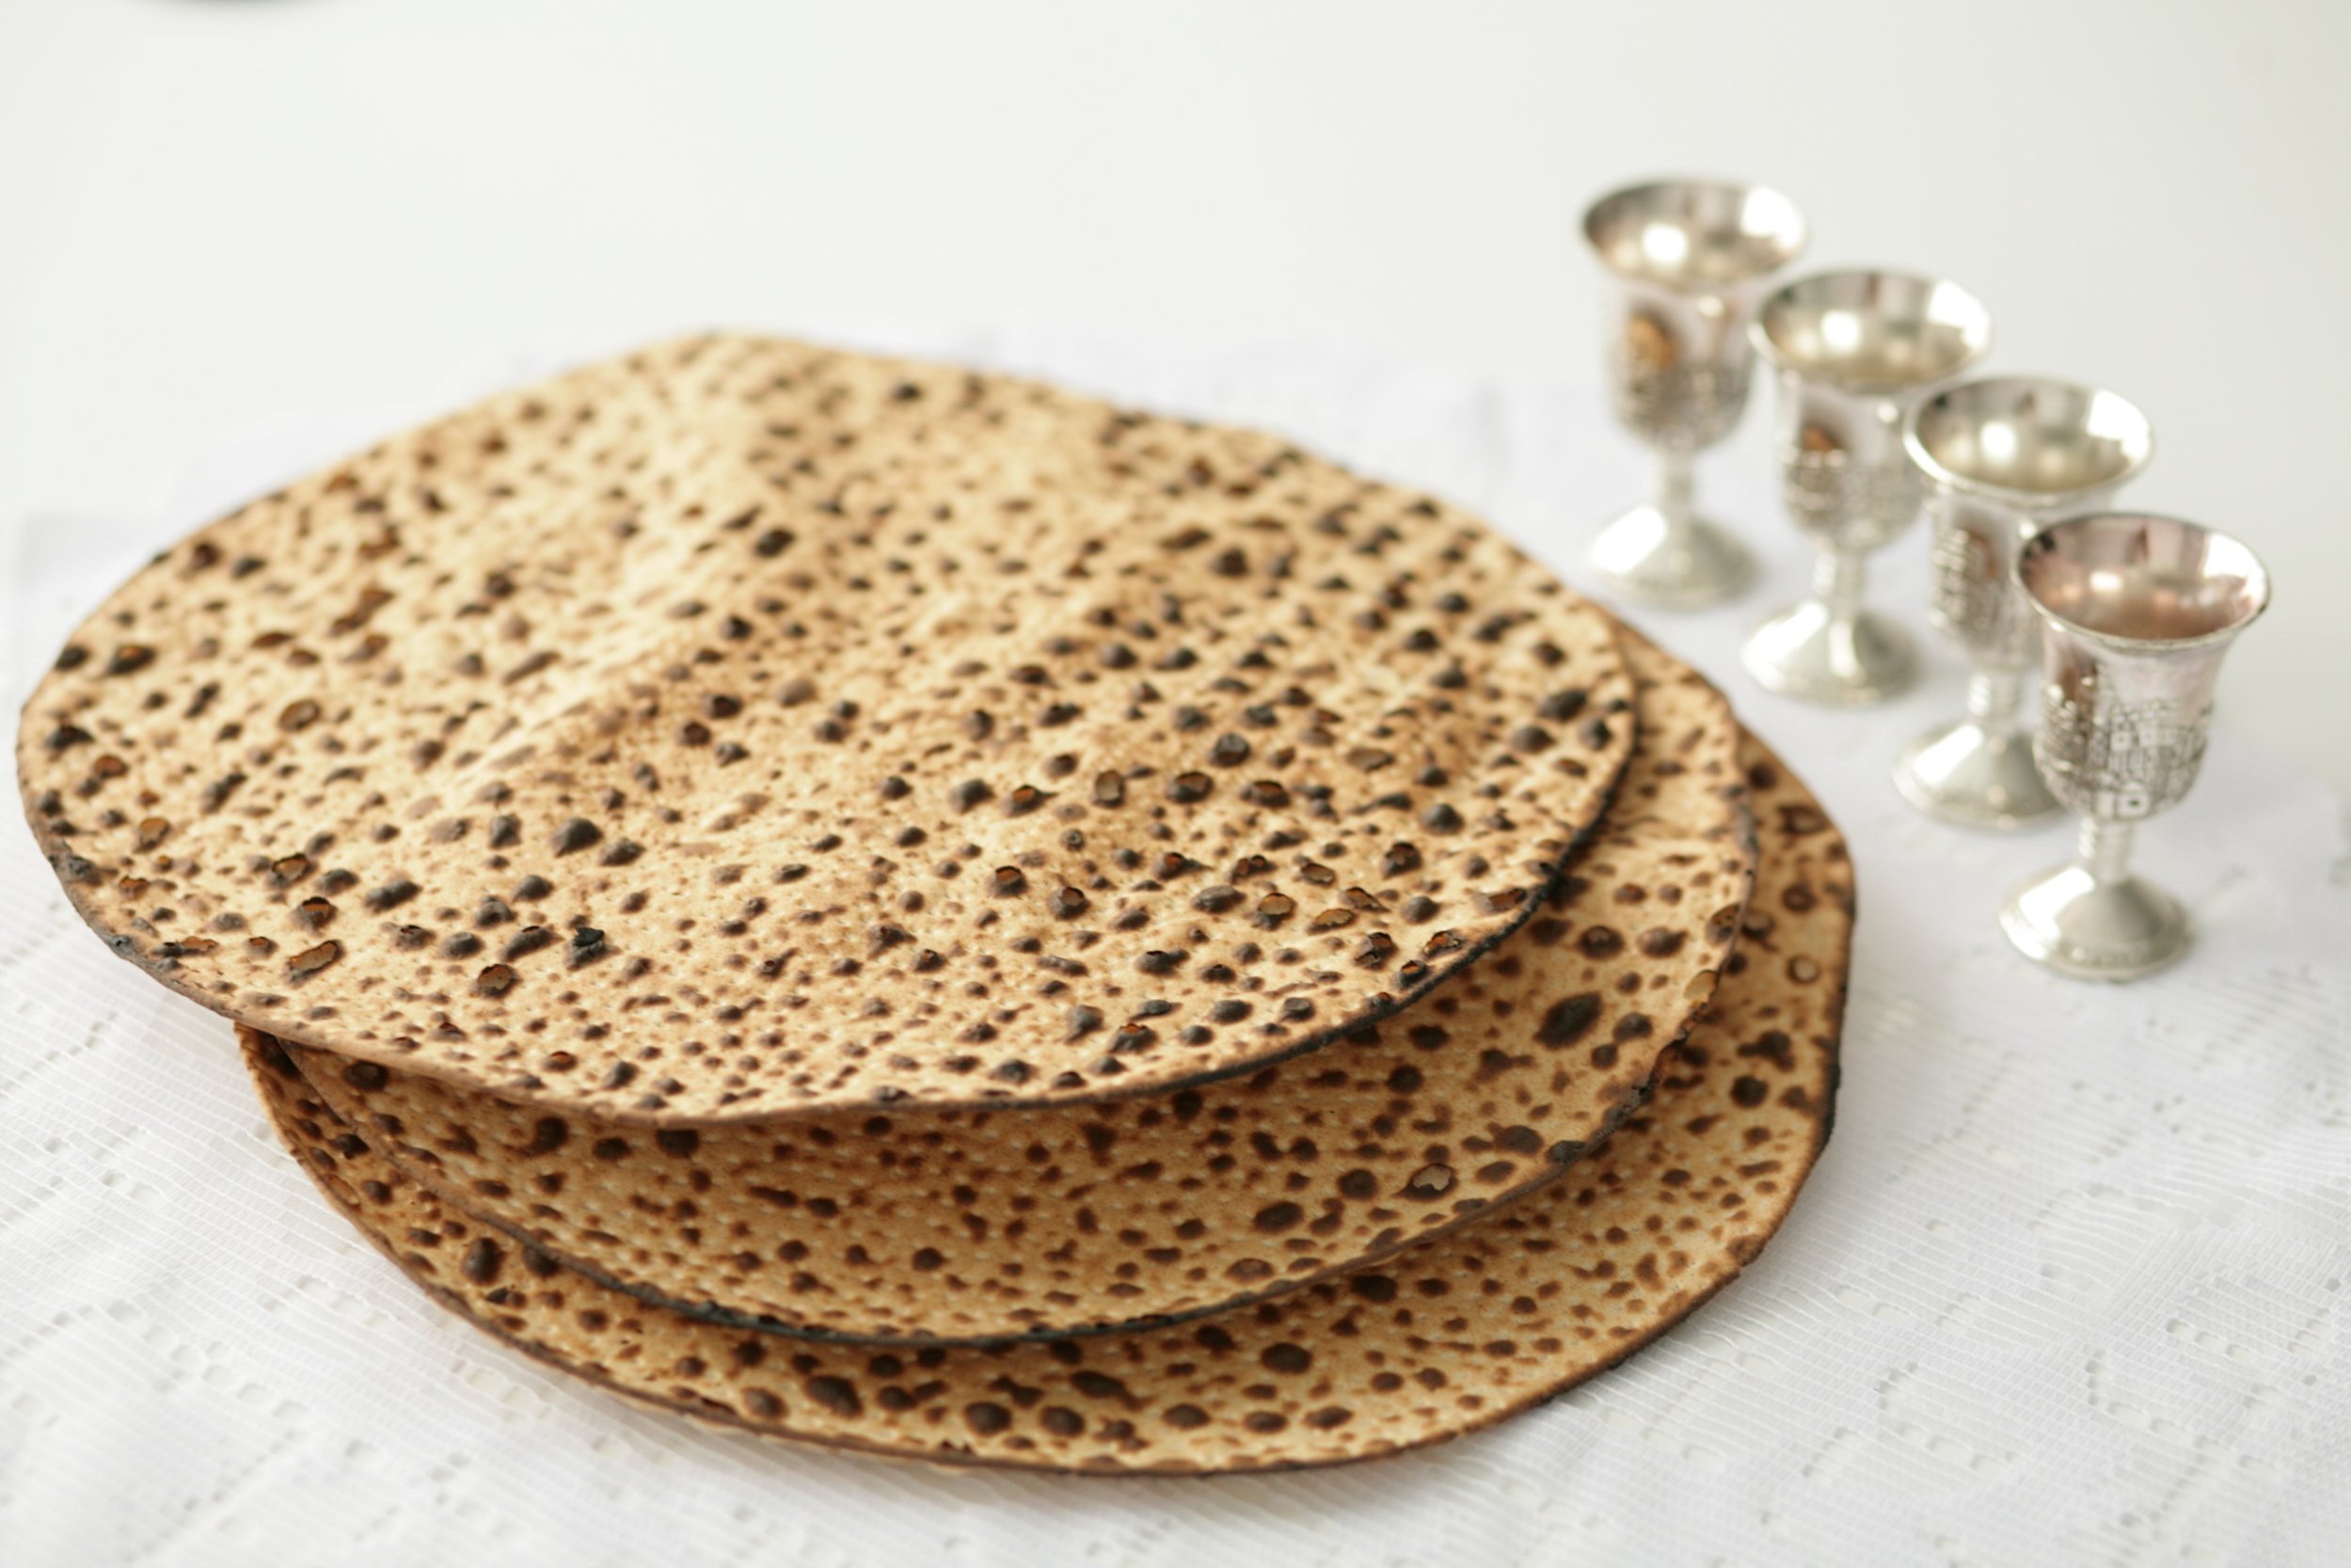   GOT MATZAH?   Order your authentic, handmade, round Shmurah Matzah. One  free package  for evrey Jewish Hall County family.   Click Here To Order   